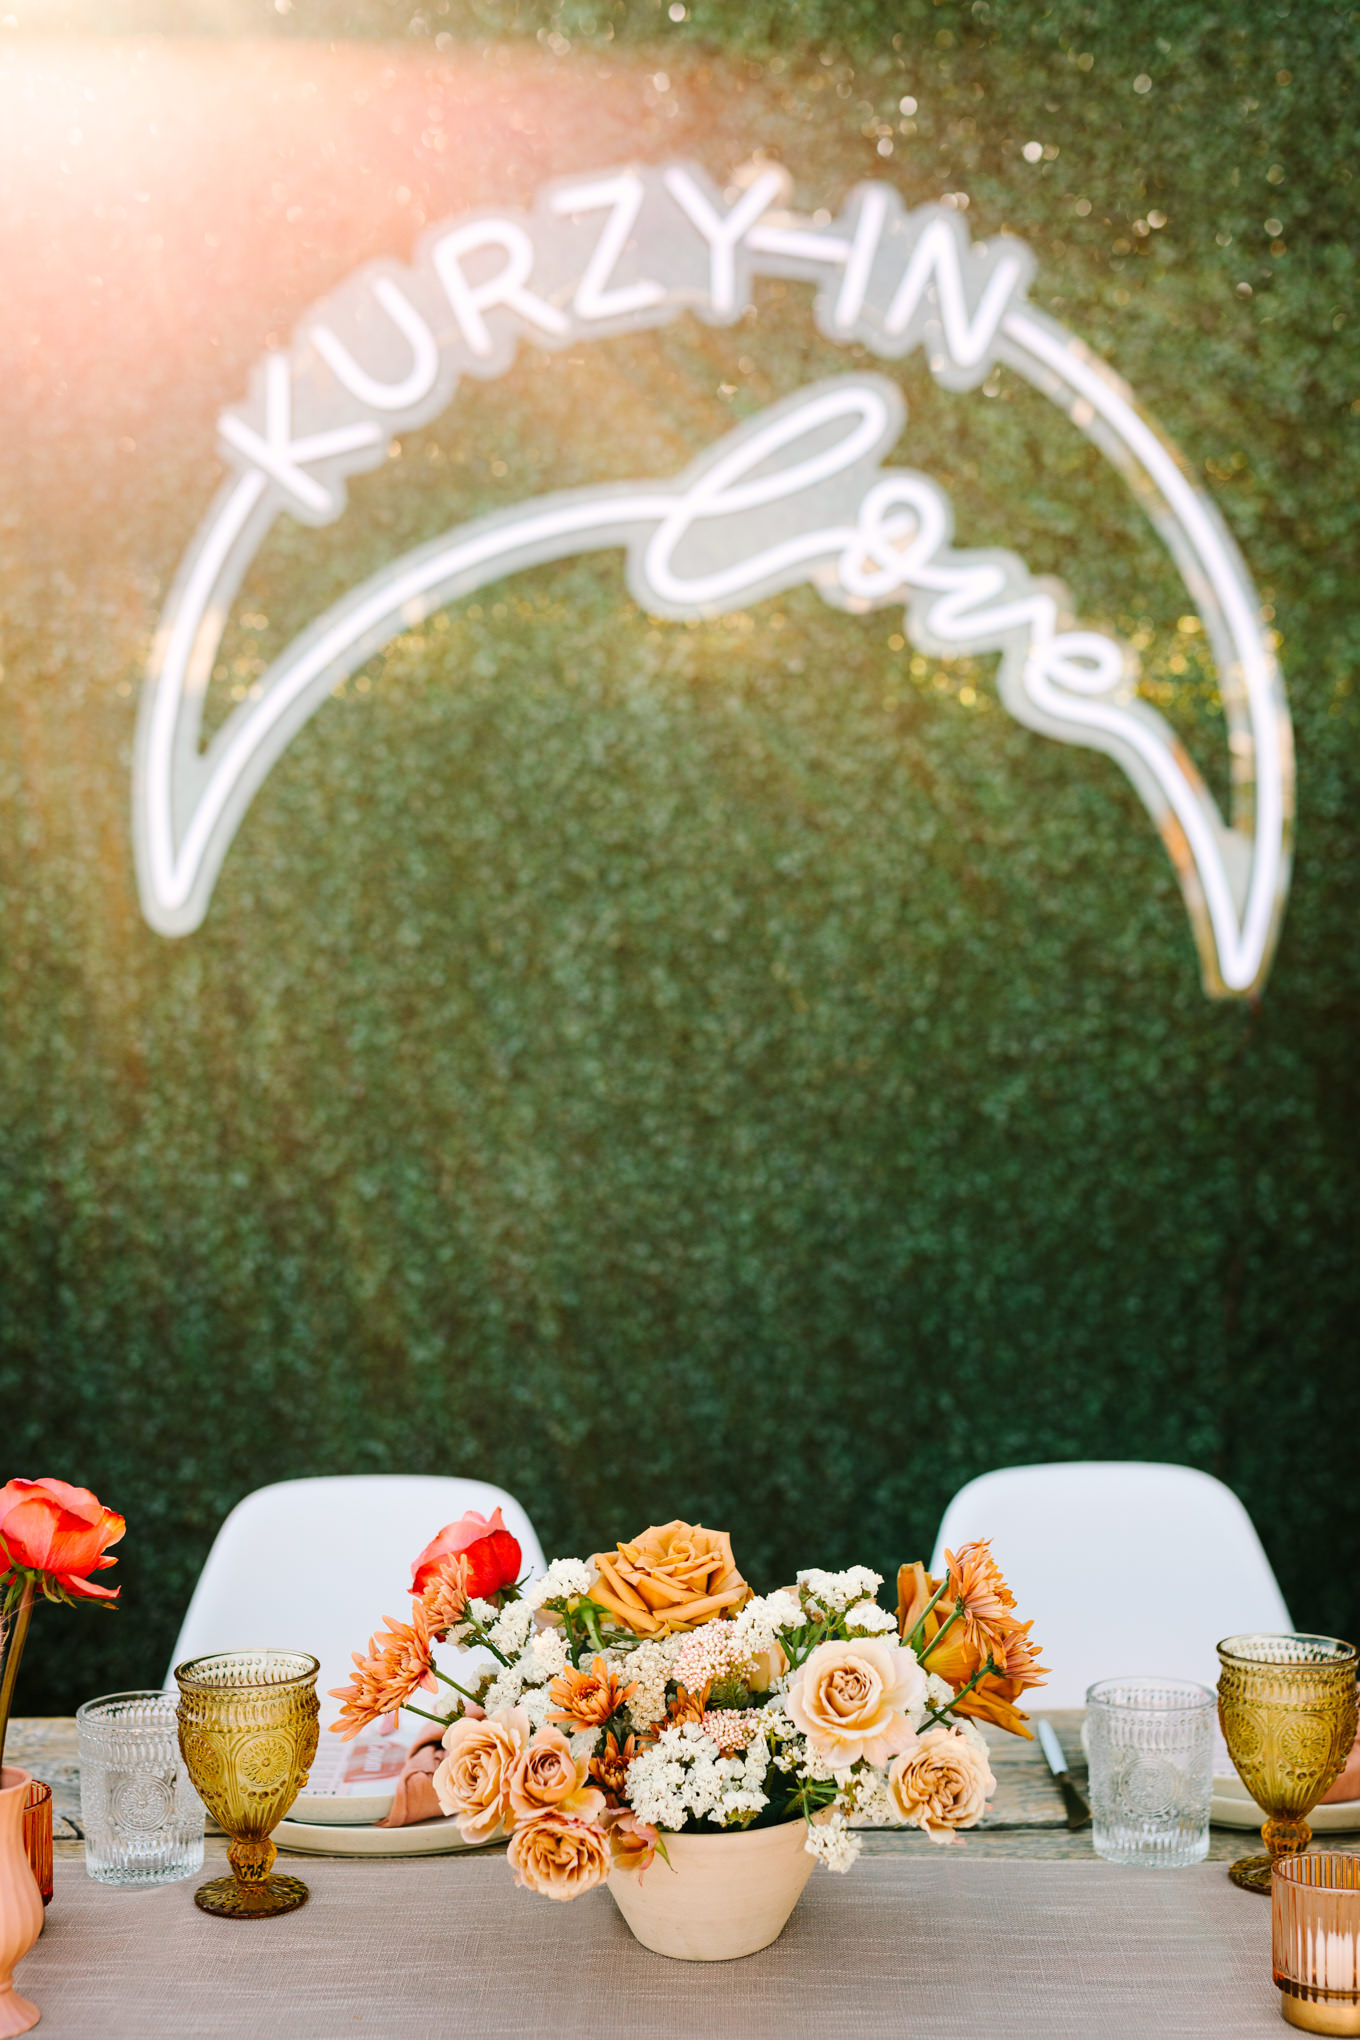 Custom neon sign for wedding | Pink and orange Lautner Compound wedding | Colorful Palm Springs wedding photography | #palmspringsphotographer #palmspringswedding #lautnercompound #southerncaliforniawedding  Source: Mary Costa Photography | Los Angeles